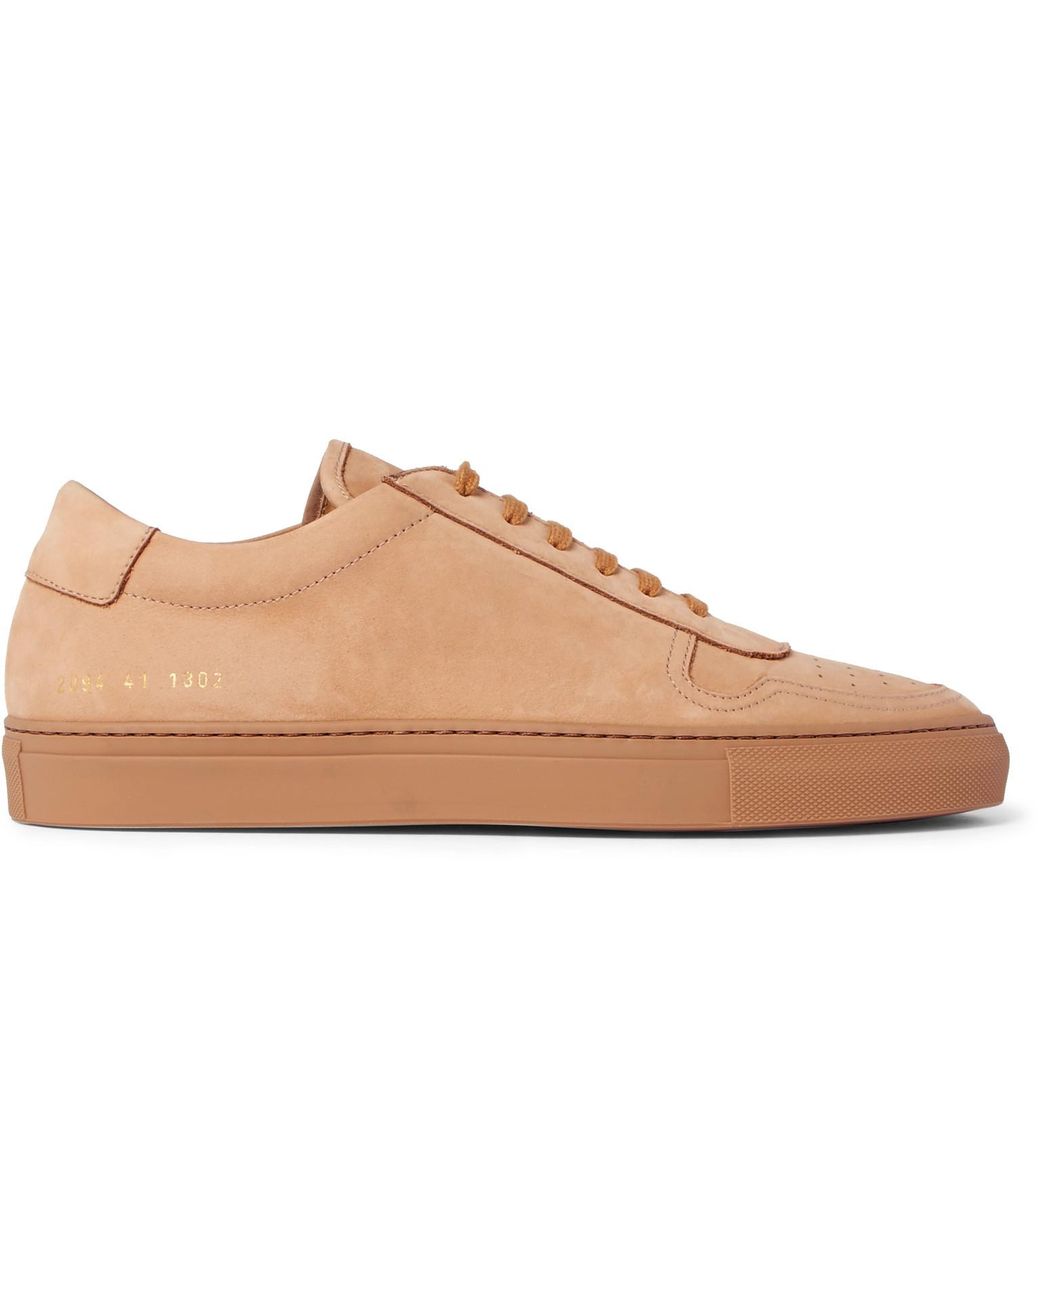 $542 Details about   COMMON PROJECTS Men's Bball Low Premium Retail NWB 